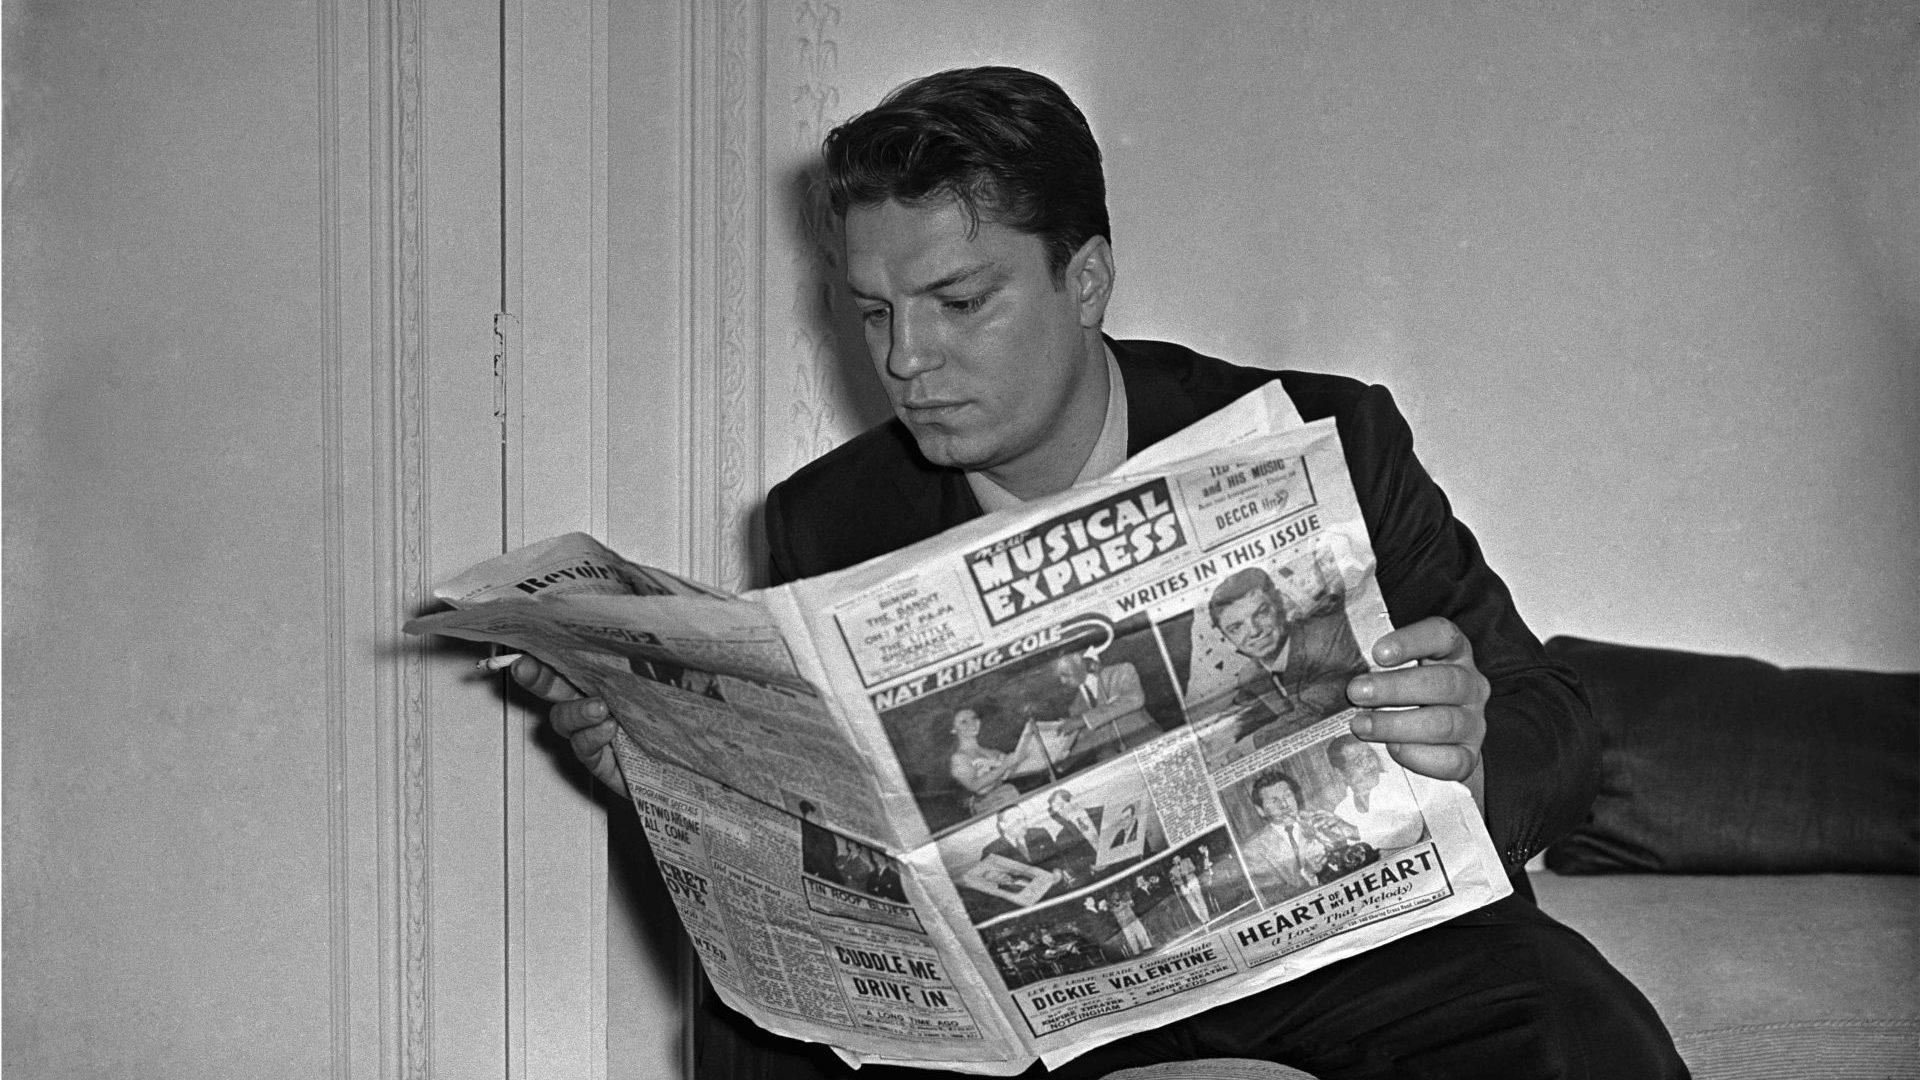 American singer Guy 
Mitchell reads the NME in 1956, not long after it launched the singles chart. Photo: Harry Hammond/V&A 
Images/Getty